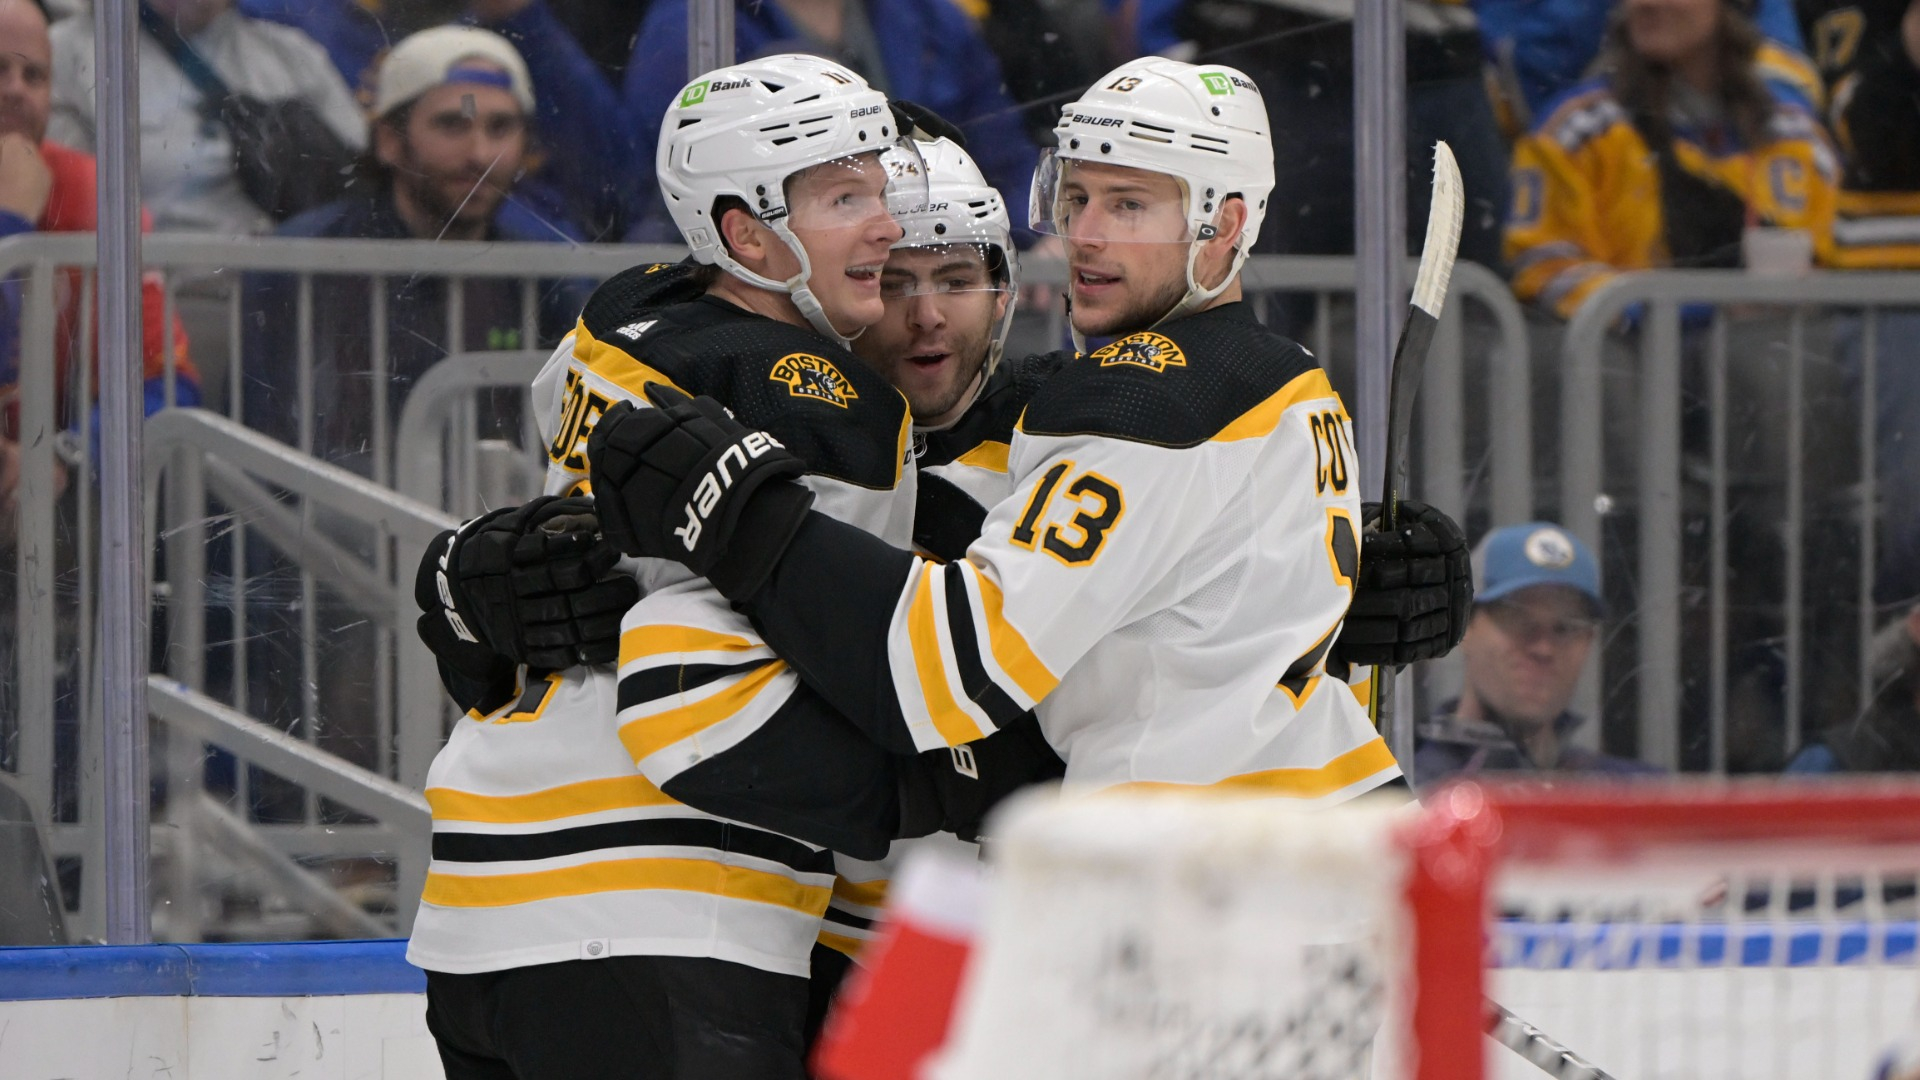 Caps edge Bruins in the shootout in Chara's return to Boston